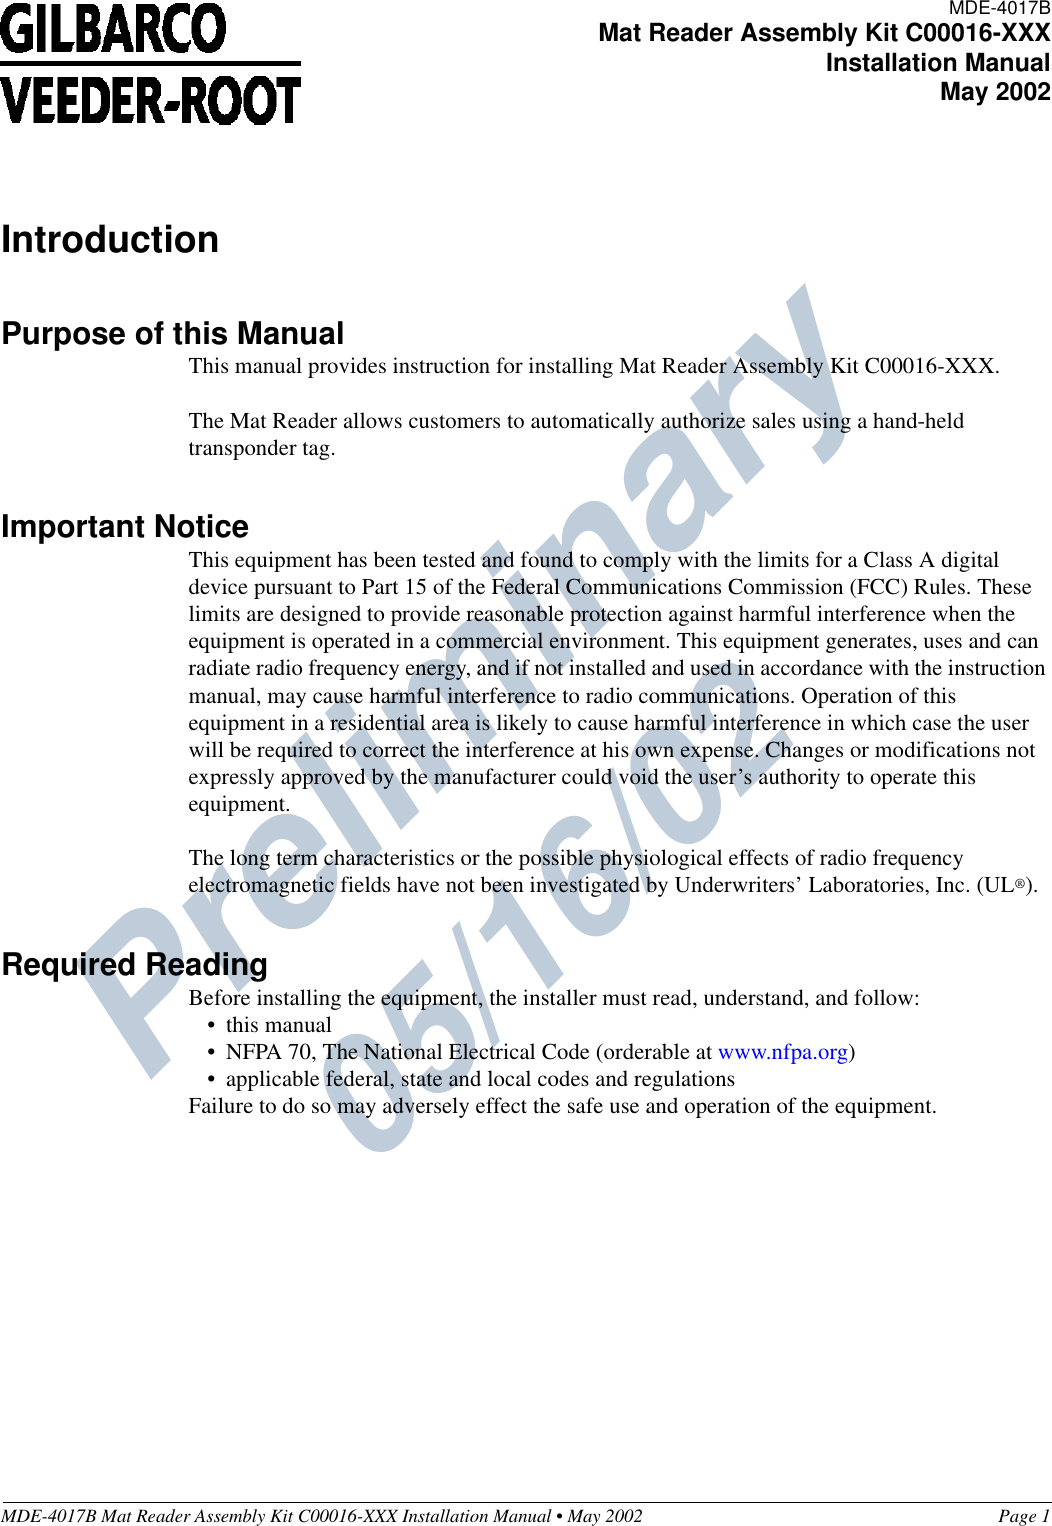 Preliminary  05/16/02MDE-4017B Mat Reader Assembly Kit C00016-XXX Installation Manual • May 2002 Page 1IntroductionPurpose of this ManualThis manual provides instruction for installing Mat Reader Assembly Kit C00016-XXX.The Mat Reader allows customers to automatically authorize sales using a hand-held transponder tag.Important NoticeThis equipment has been tested and found to comply with the limits for a Class A digital device pursuant to Part 15 of the Federal Communications Commission (FCC) Rules. These limits are designed to provide reasonable protection against harmful interference when the equipment is operated in a commercial environment. This equipment generates, uses and can radiate radio frequency energy, and if not installed and used in accordance with the instruction manual, may cause harmful interference to radio communications. Operation of this equipment in a residential area is likely to cause harmful interference in which case the user will be required to correct the interference at his own expense. Changes or modifications not expressly approved by the manufacturer could void the user’s authority to operate this equipment.The long term characteristics or the possible physiological effects of radio frequency electromagnetic fields have not been investigated by Underwriters’ Laboratories, Inc. (UL®).Required ReadingBefore installing the equipment, the installer must read, understand, and follow:•this manual•NFPA 70, The National Electrical Code (orderable at www.nfpa.org)•applicable federal, state and local codes and regulationsFailure to do so may adversely effect the safe use and operation of the equipment.MDE-4017BMat Reader Assembly Kit C00016-XXXInstallation ManualMay 2002